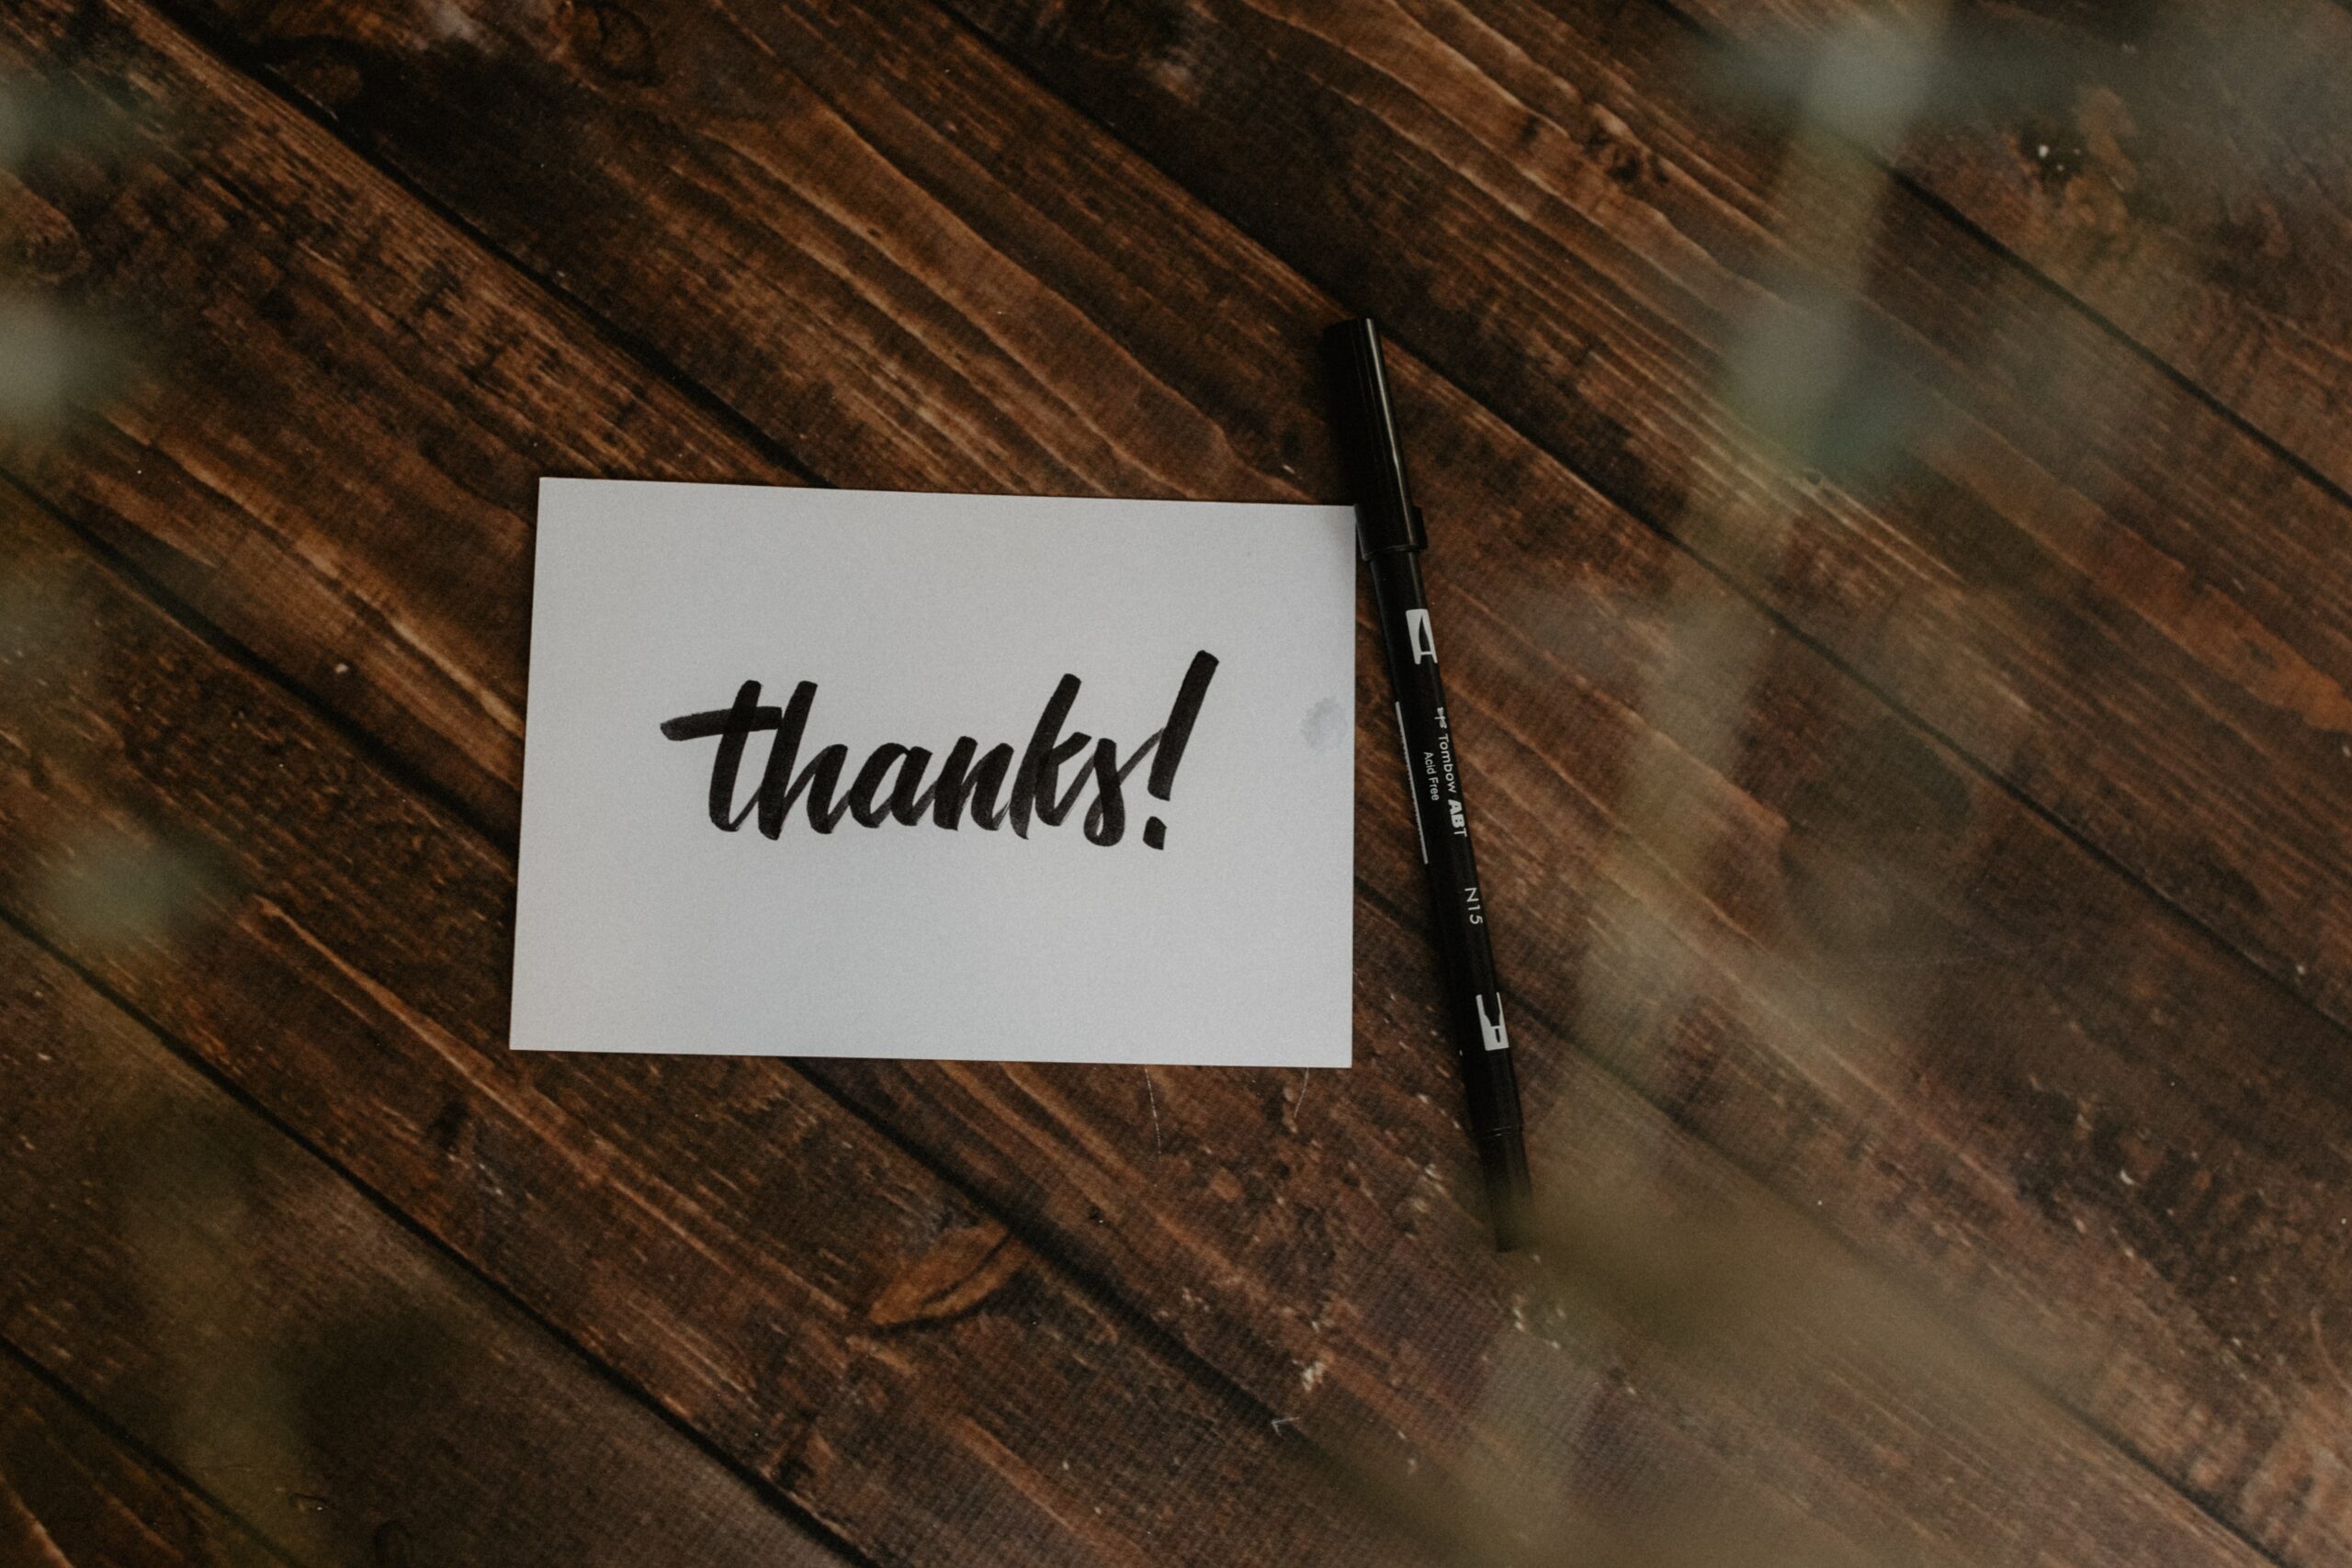 When, Why and How to Write a Thank You Note